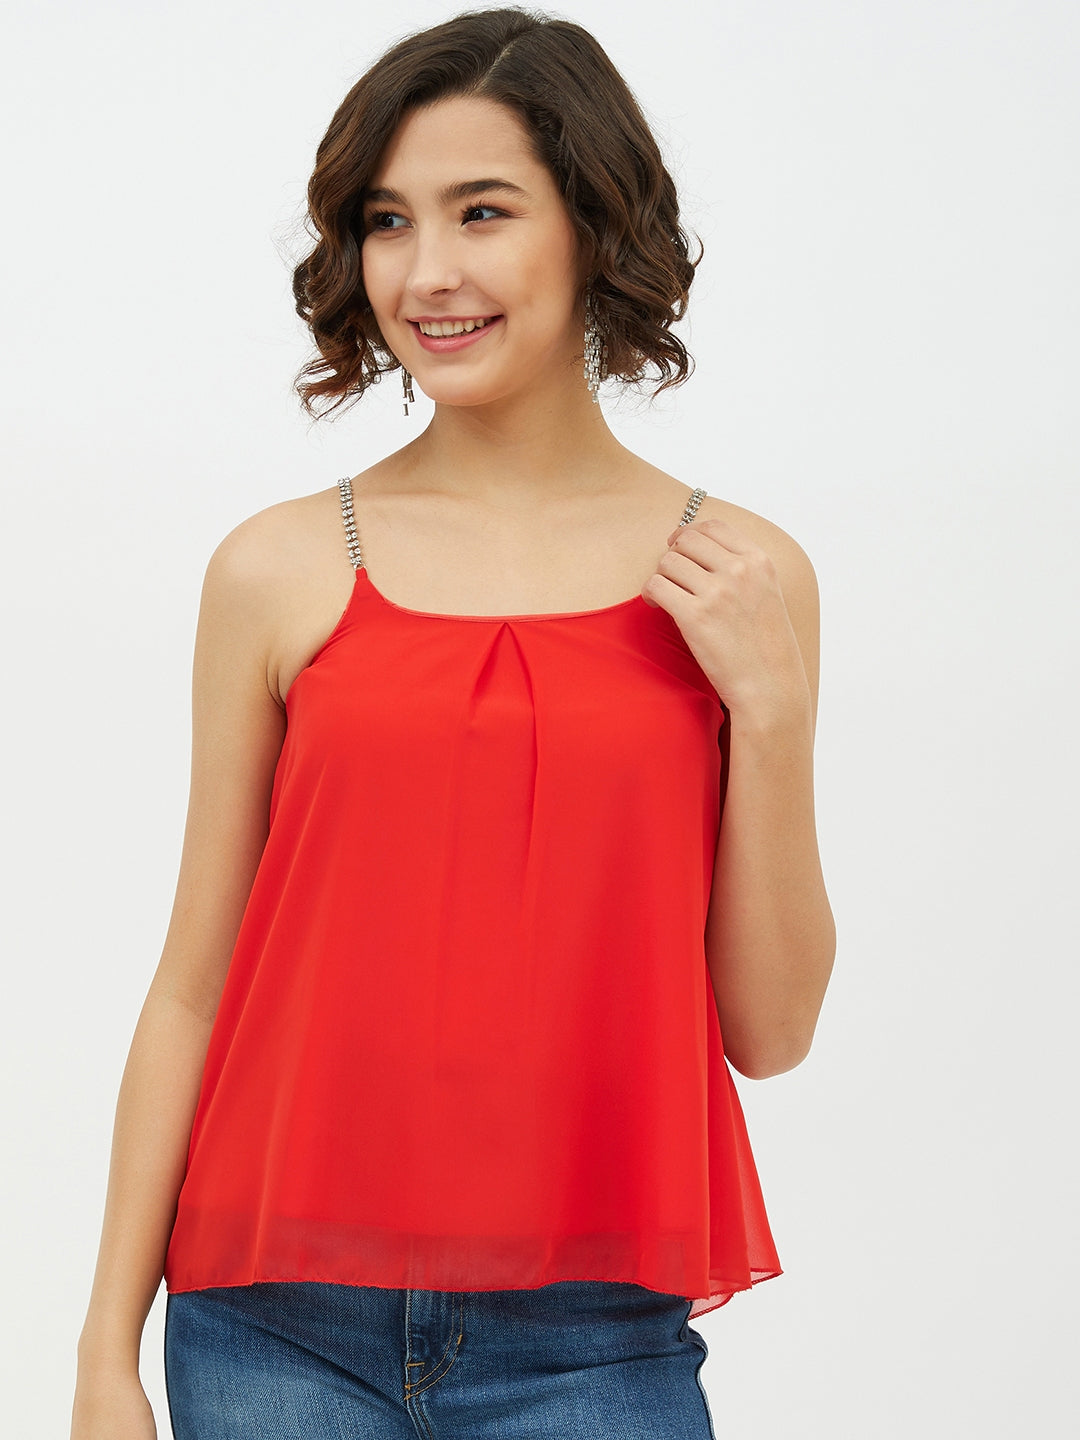 Women's Red top with embellished Strap - StyleStone